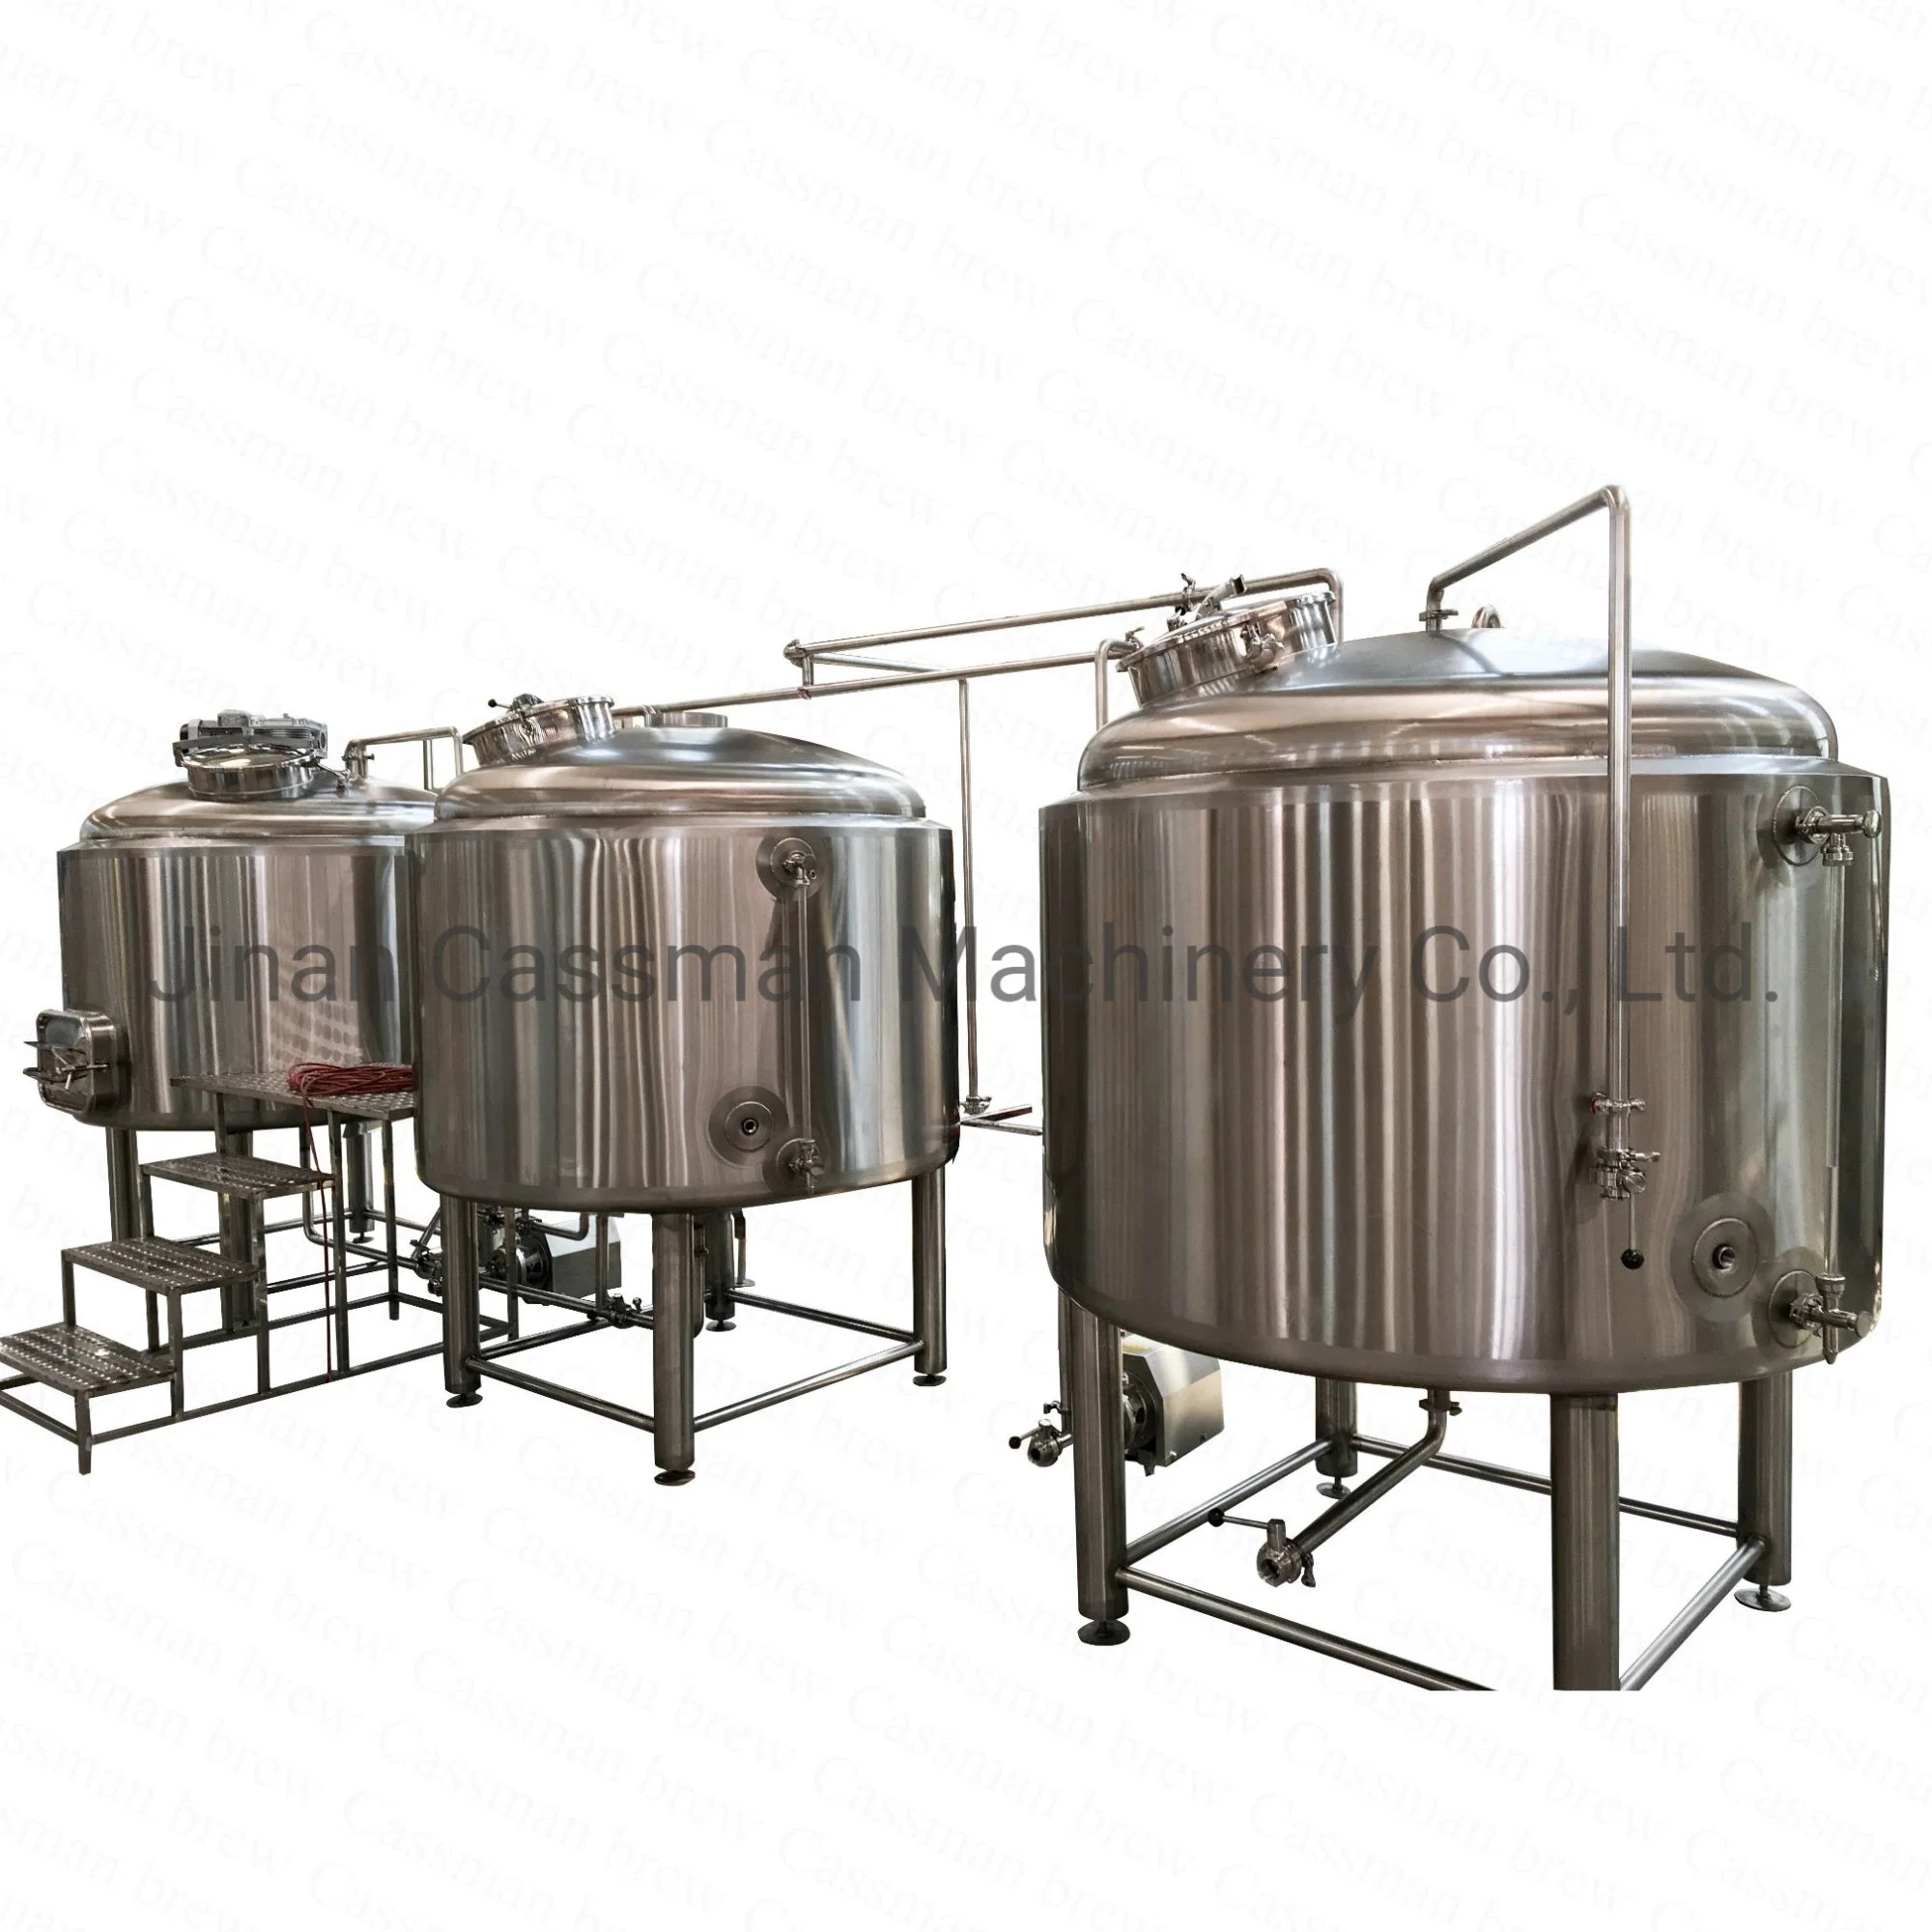 Cassman Industrial Brewery Equipment 10 Bbl 1000L Beer Production Line